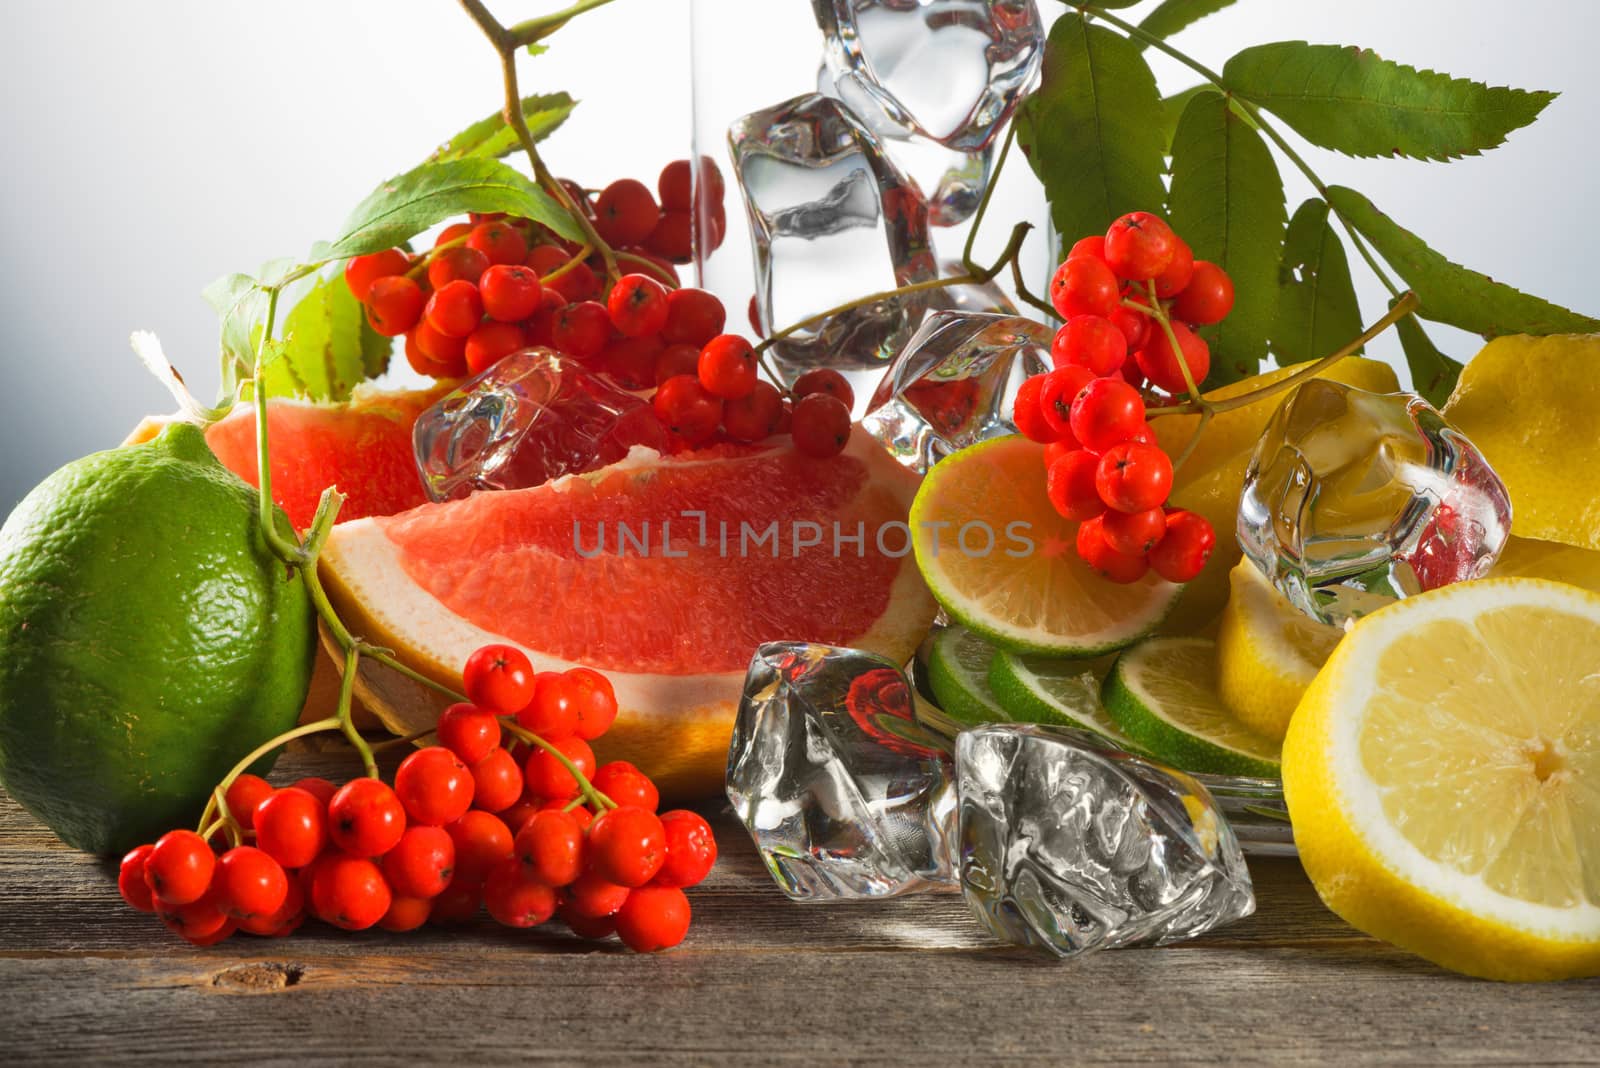 Mountain ash berries on branches with leaves and the cut citrus fruits with ice pieces on wooden boards